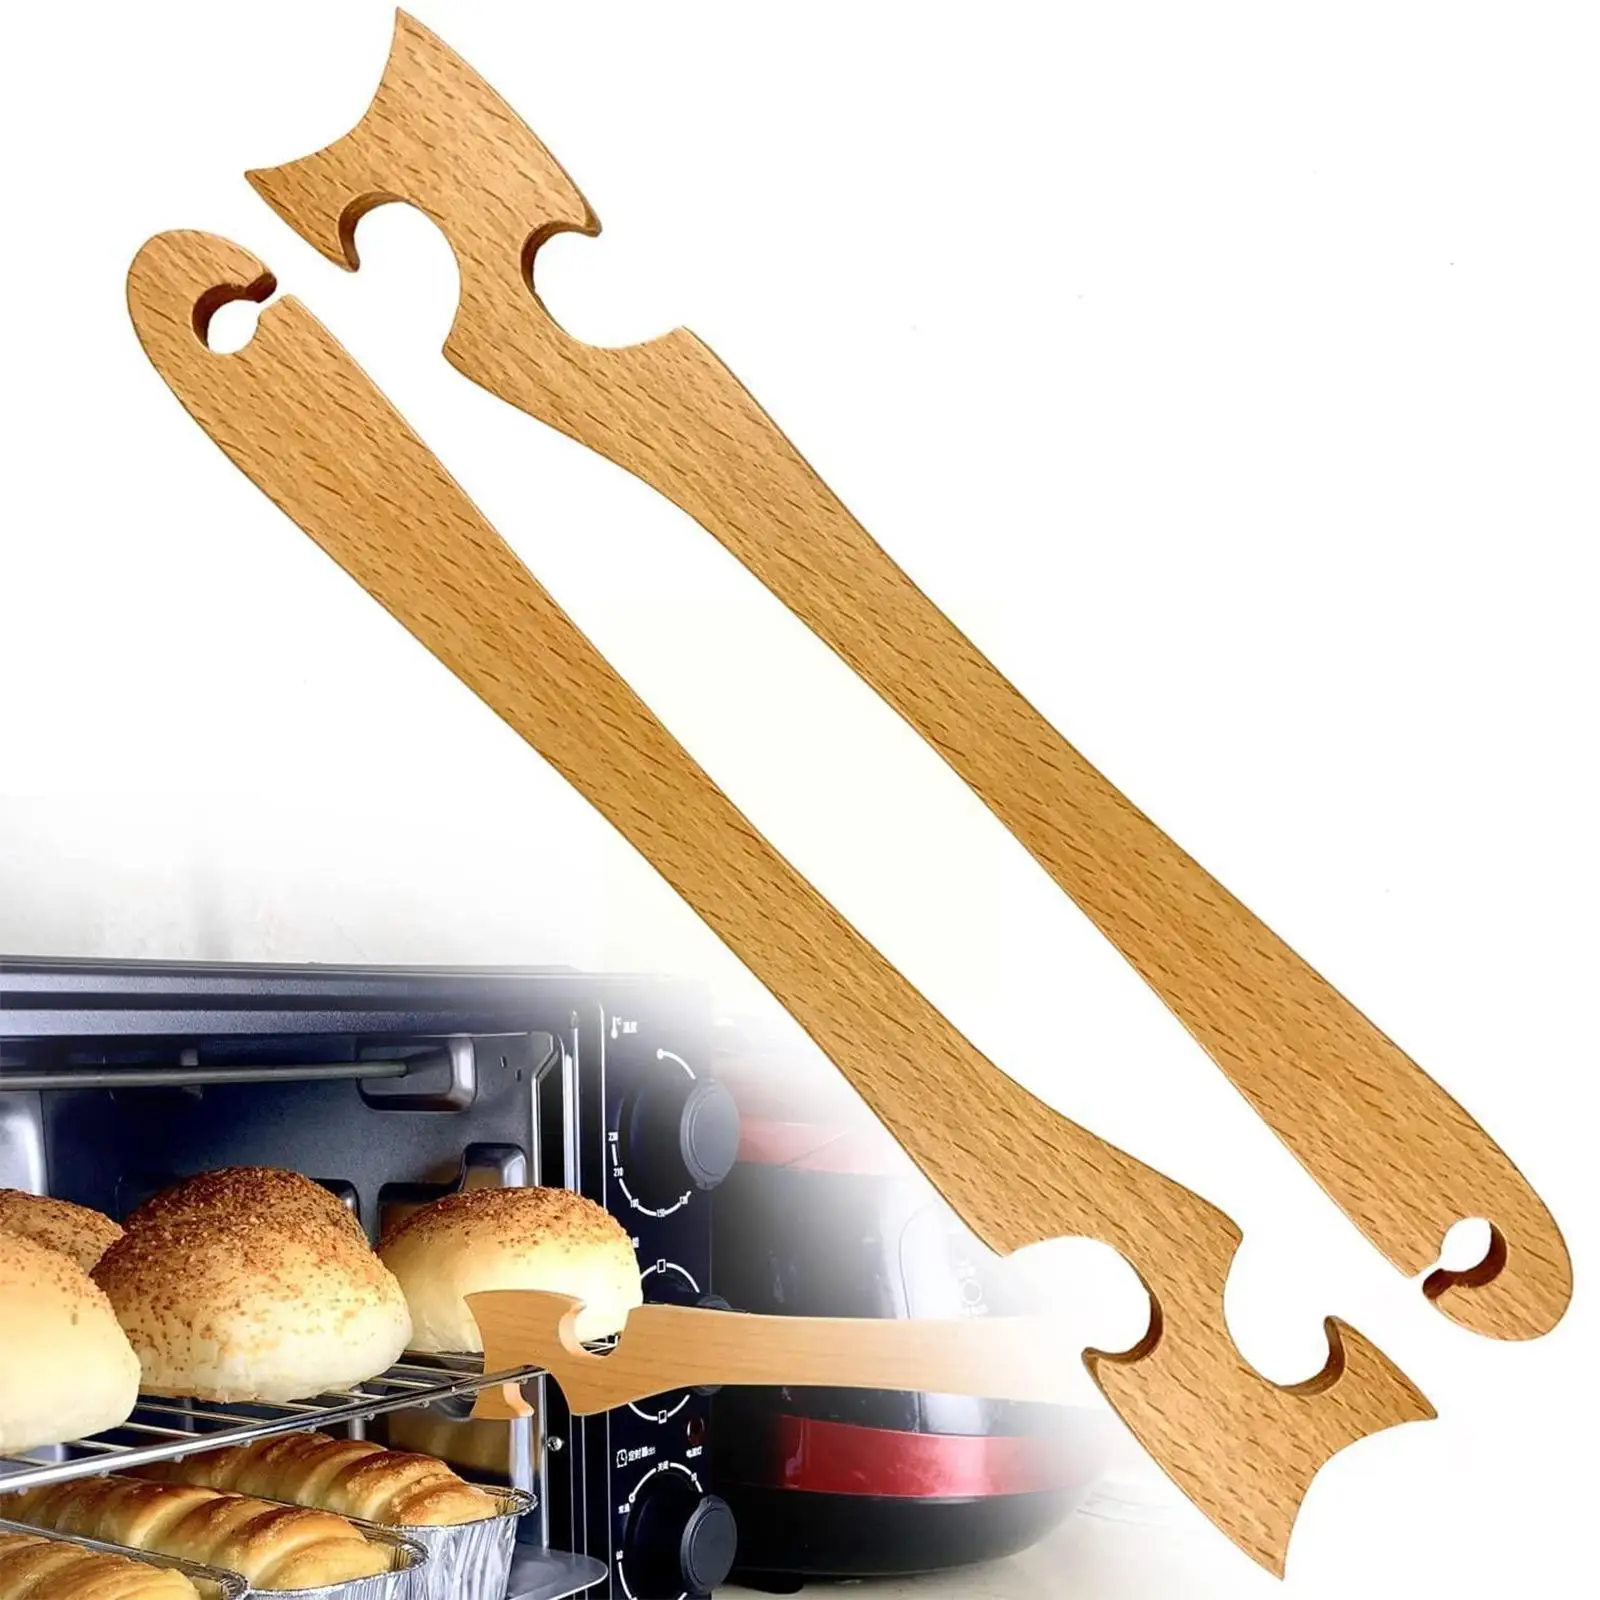 

Oven Rack Puller, Oven Accessories Are Made Of Beech Has Hook Wood Oven Toaster Length, Enough Tool Handle H6A8